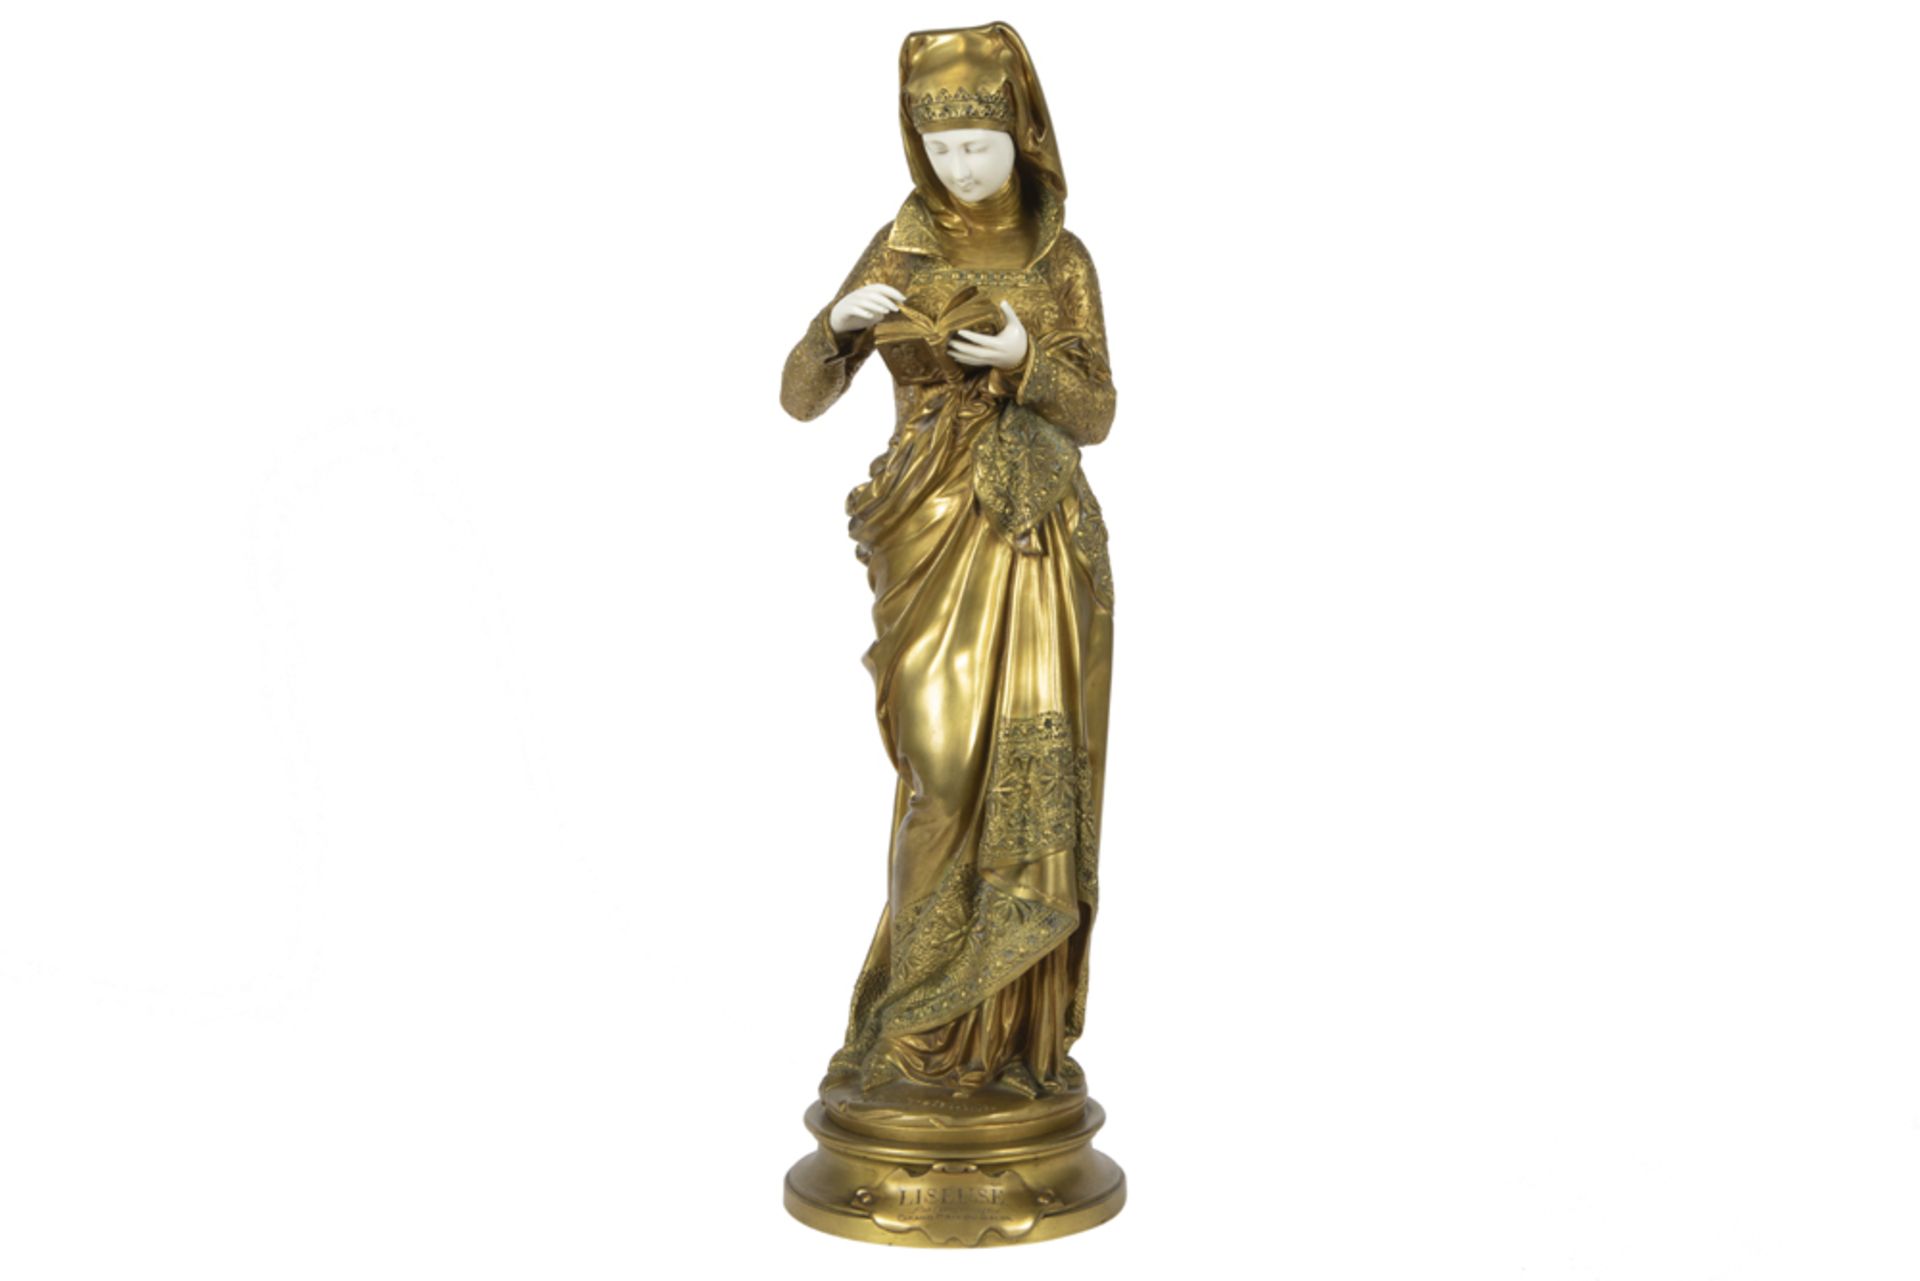 19th Cent.Carrier-Belleuse signed chryselephantine sculpture in gilded bronze and ivory - with